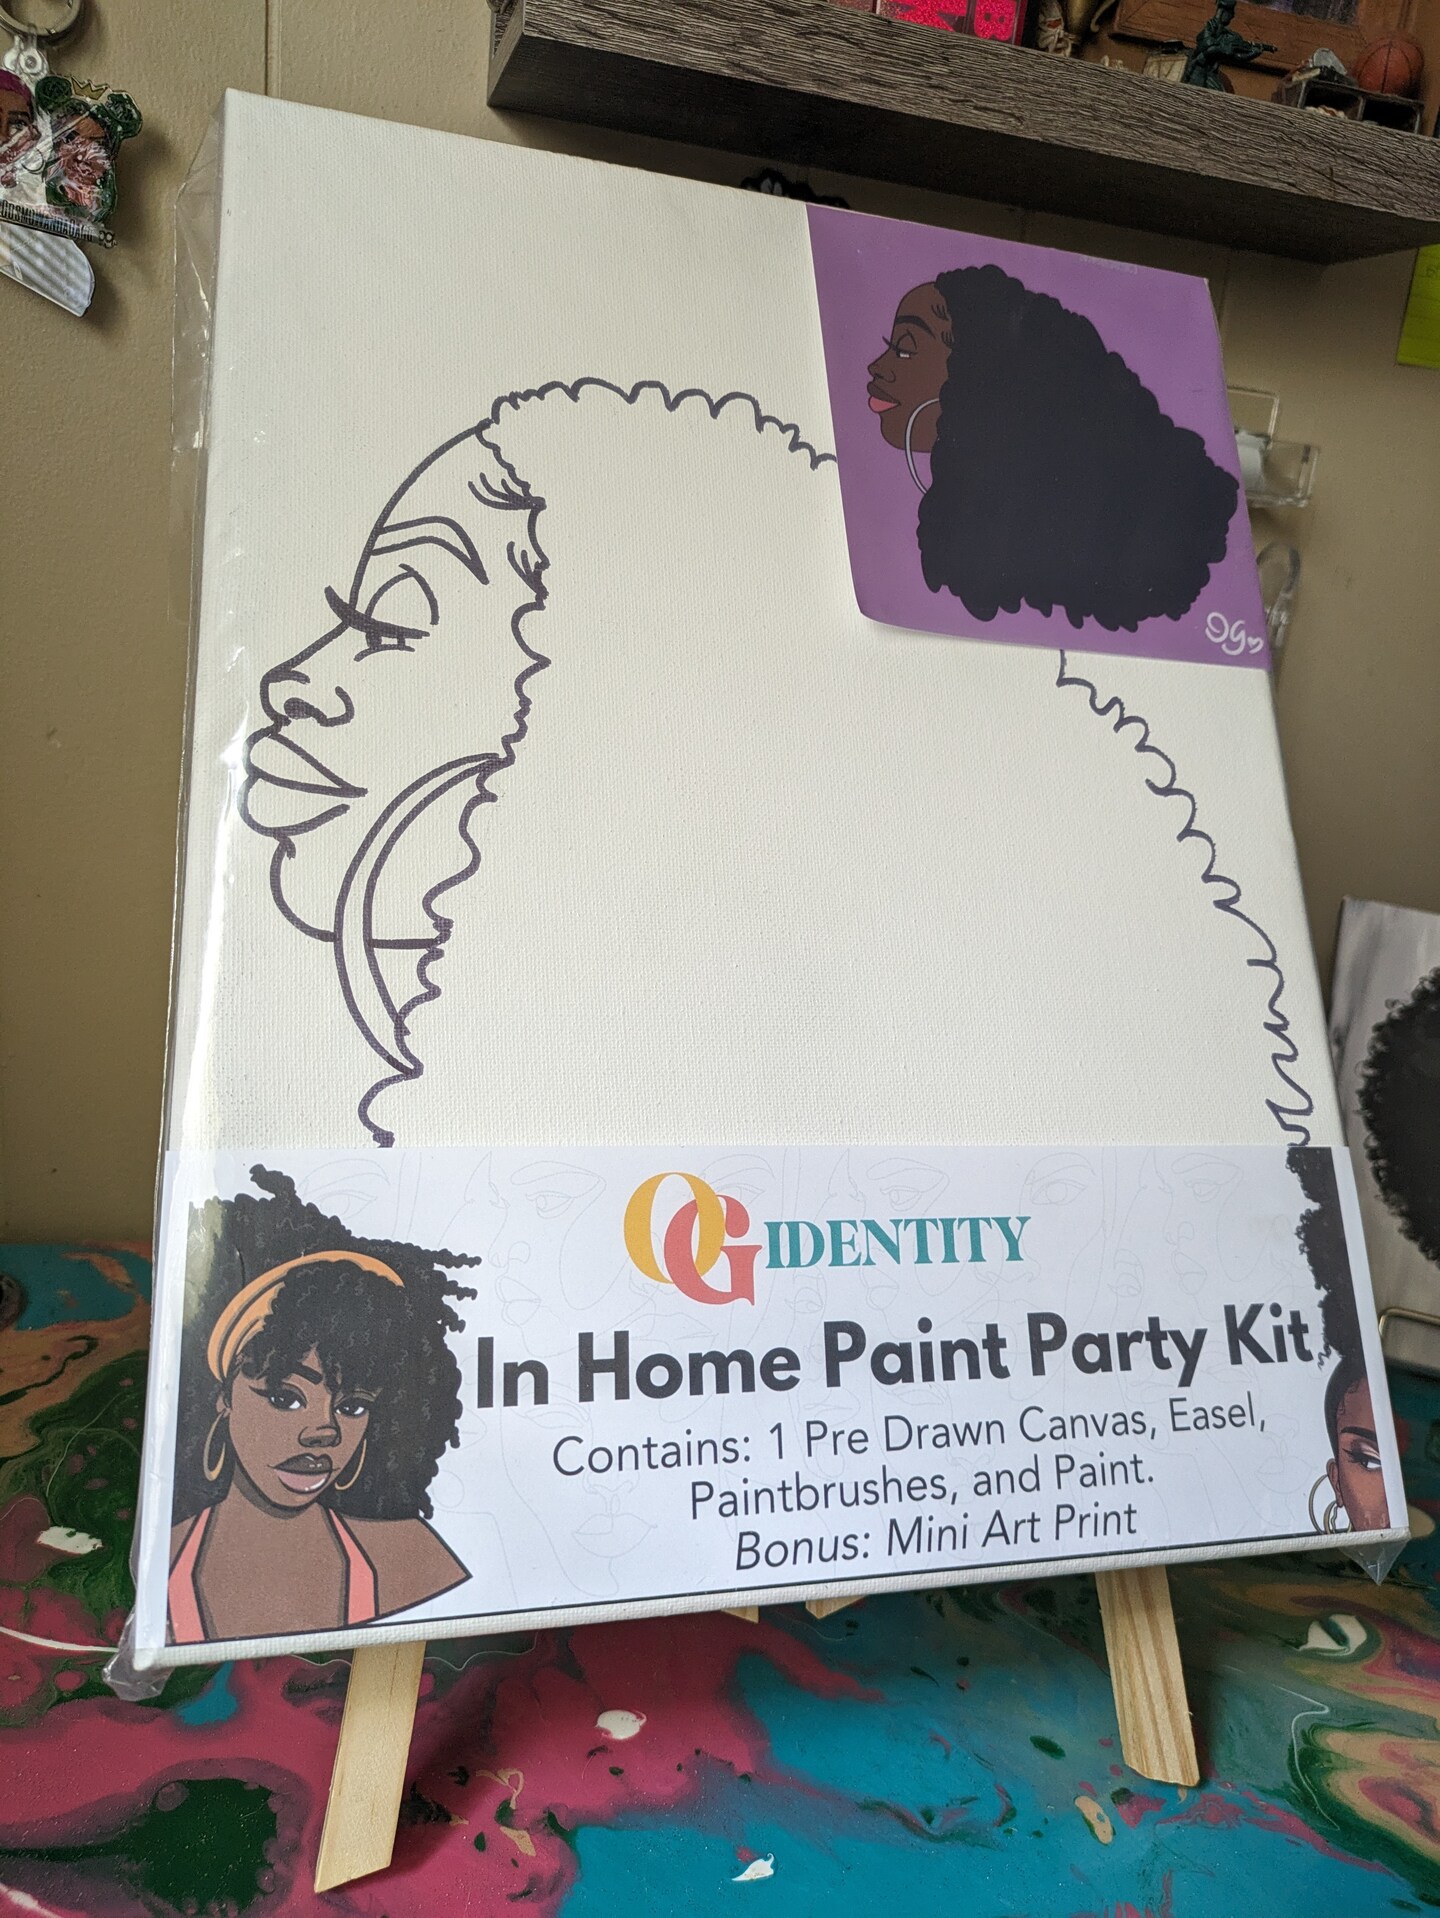 AMAZING AT HOME PAINT PARTY KITS